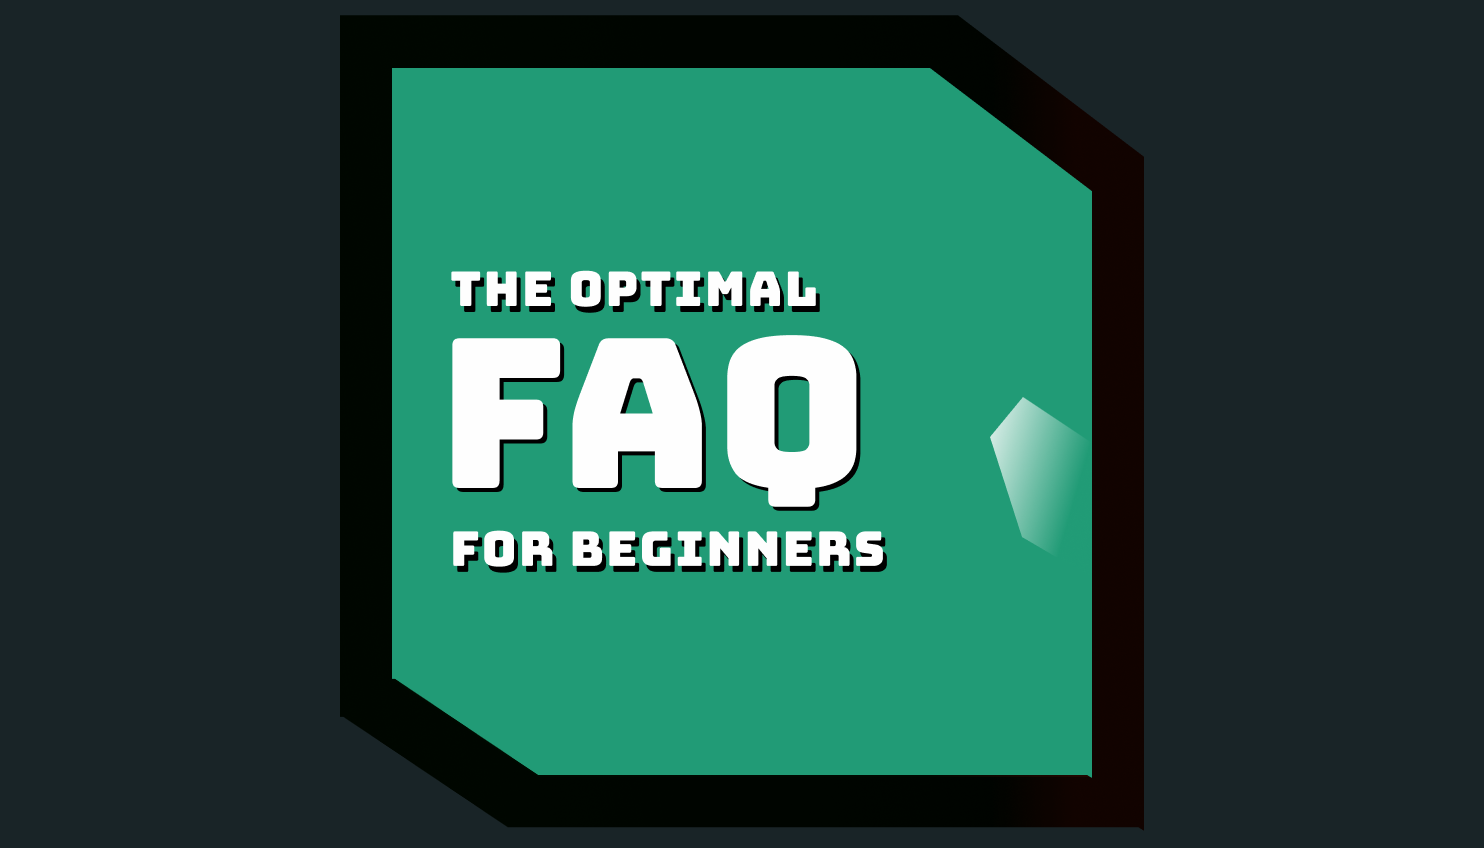 [Updated] The optimal FAQ for beginners